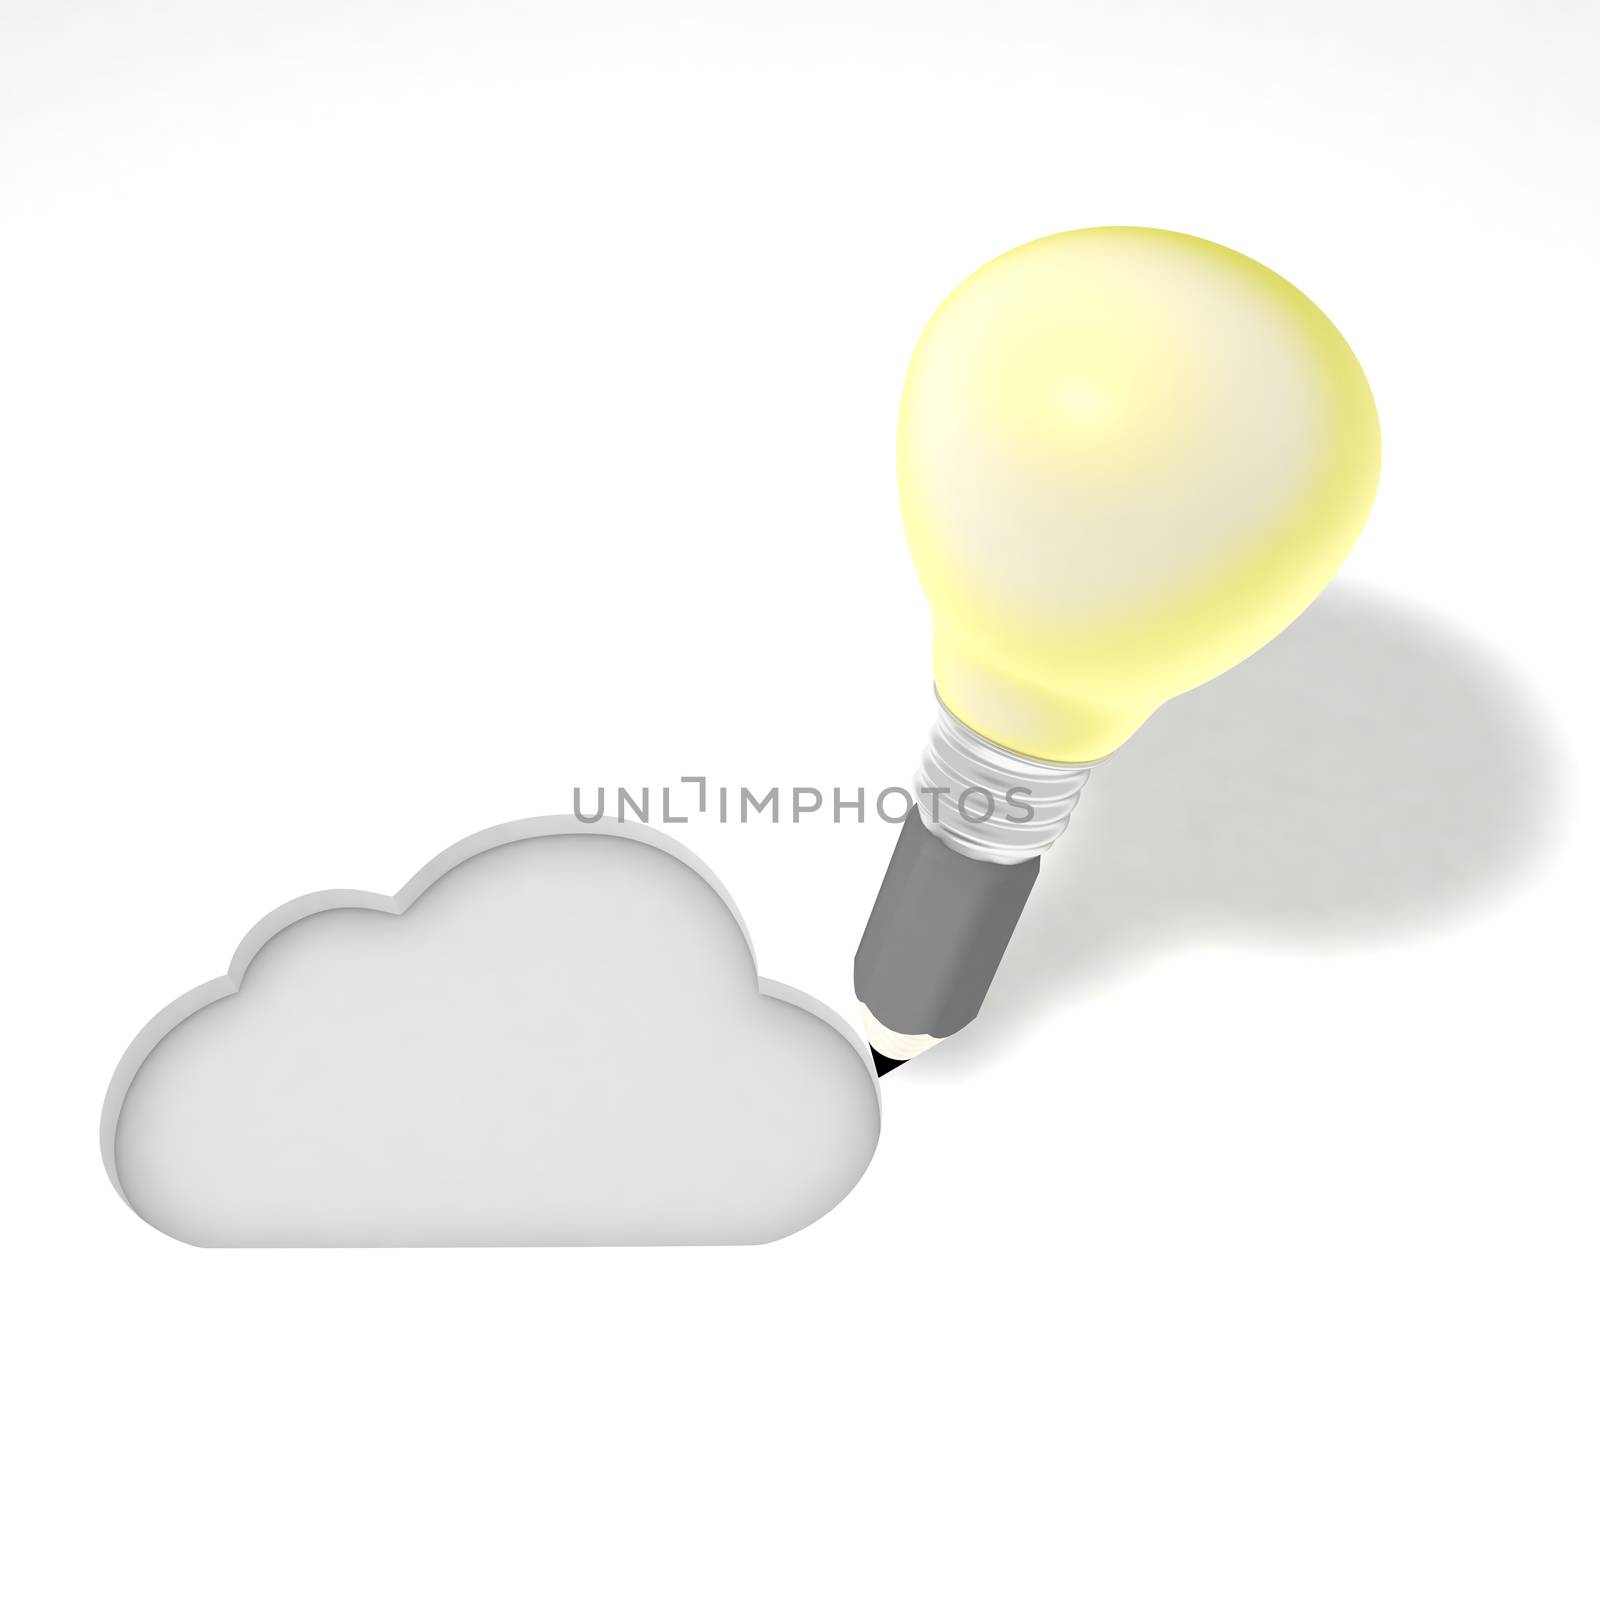 This illustration represents the conception of aninternet cloud services.